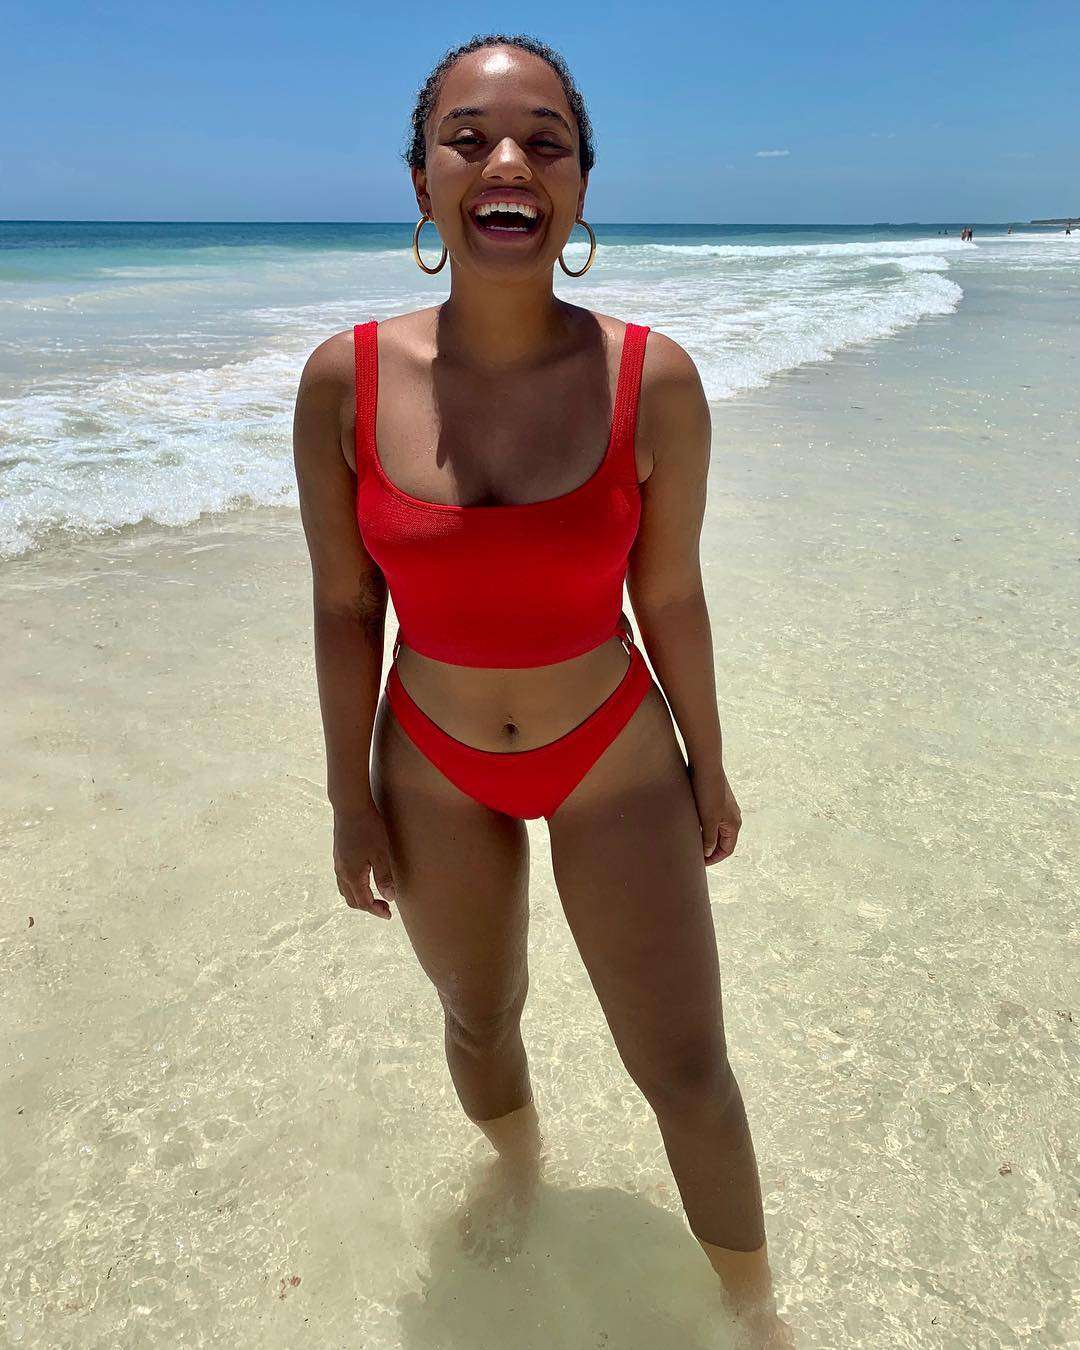 50+ Hot Pictures Of Kiersey Clemons – Iris West Actress In Upcoming Flash Movie | Best Of Comic Books